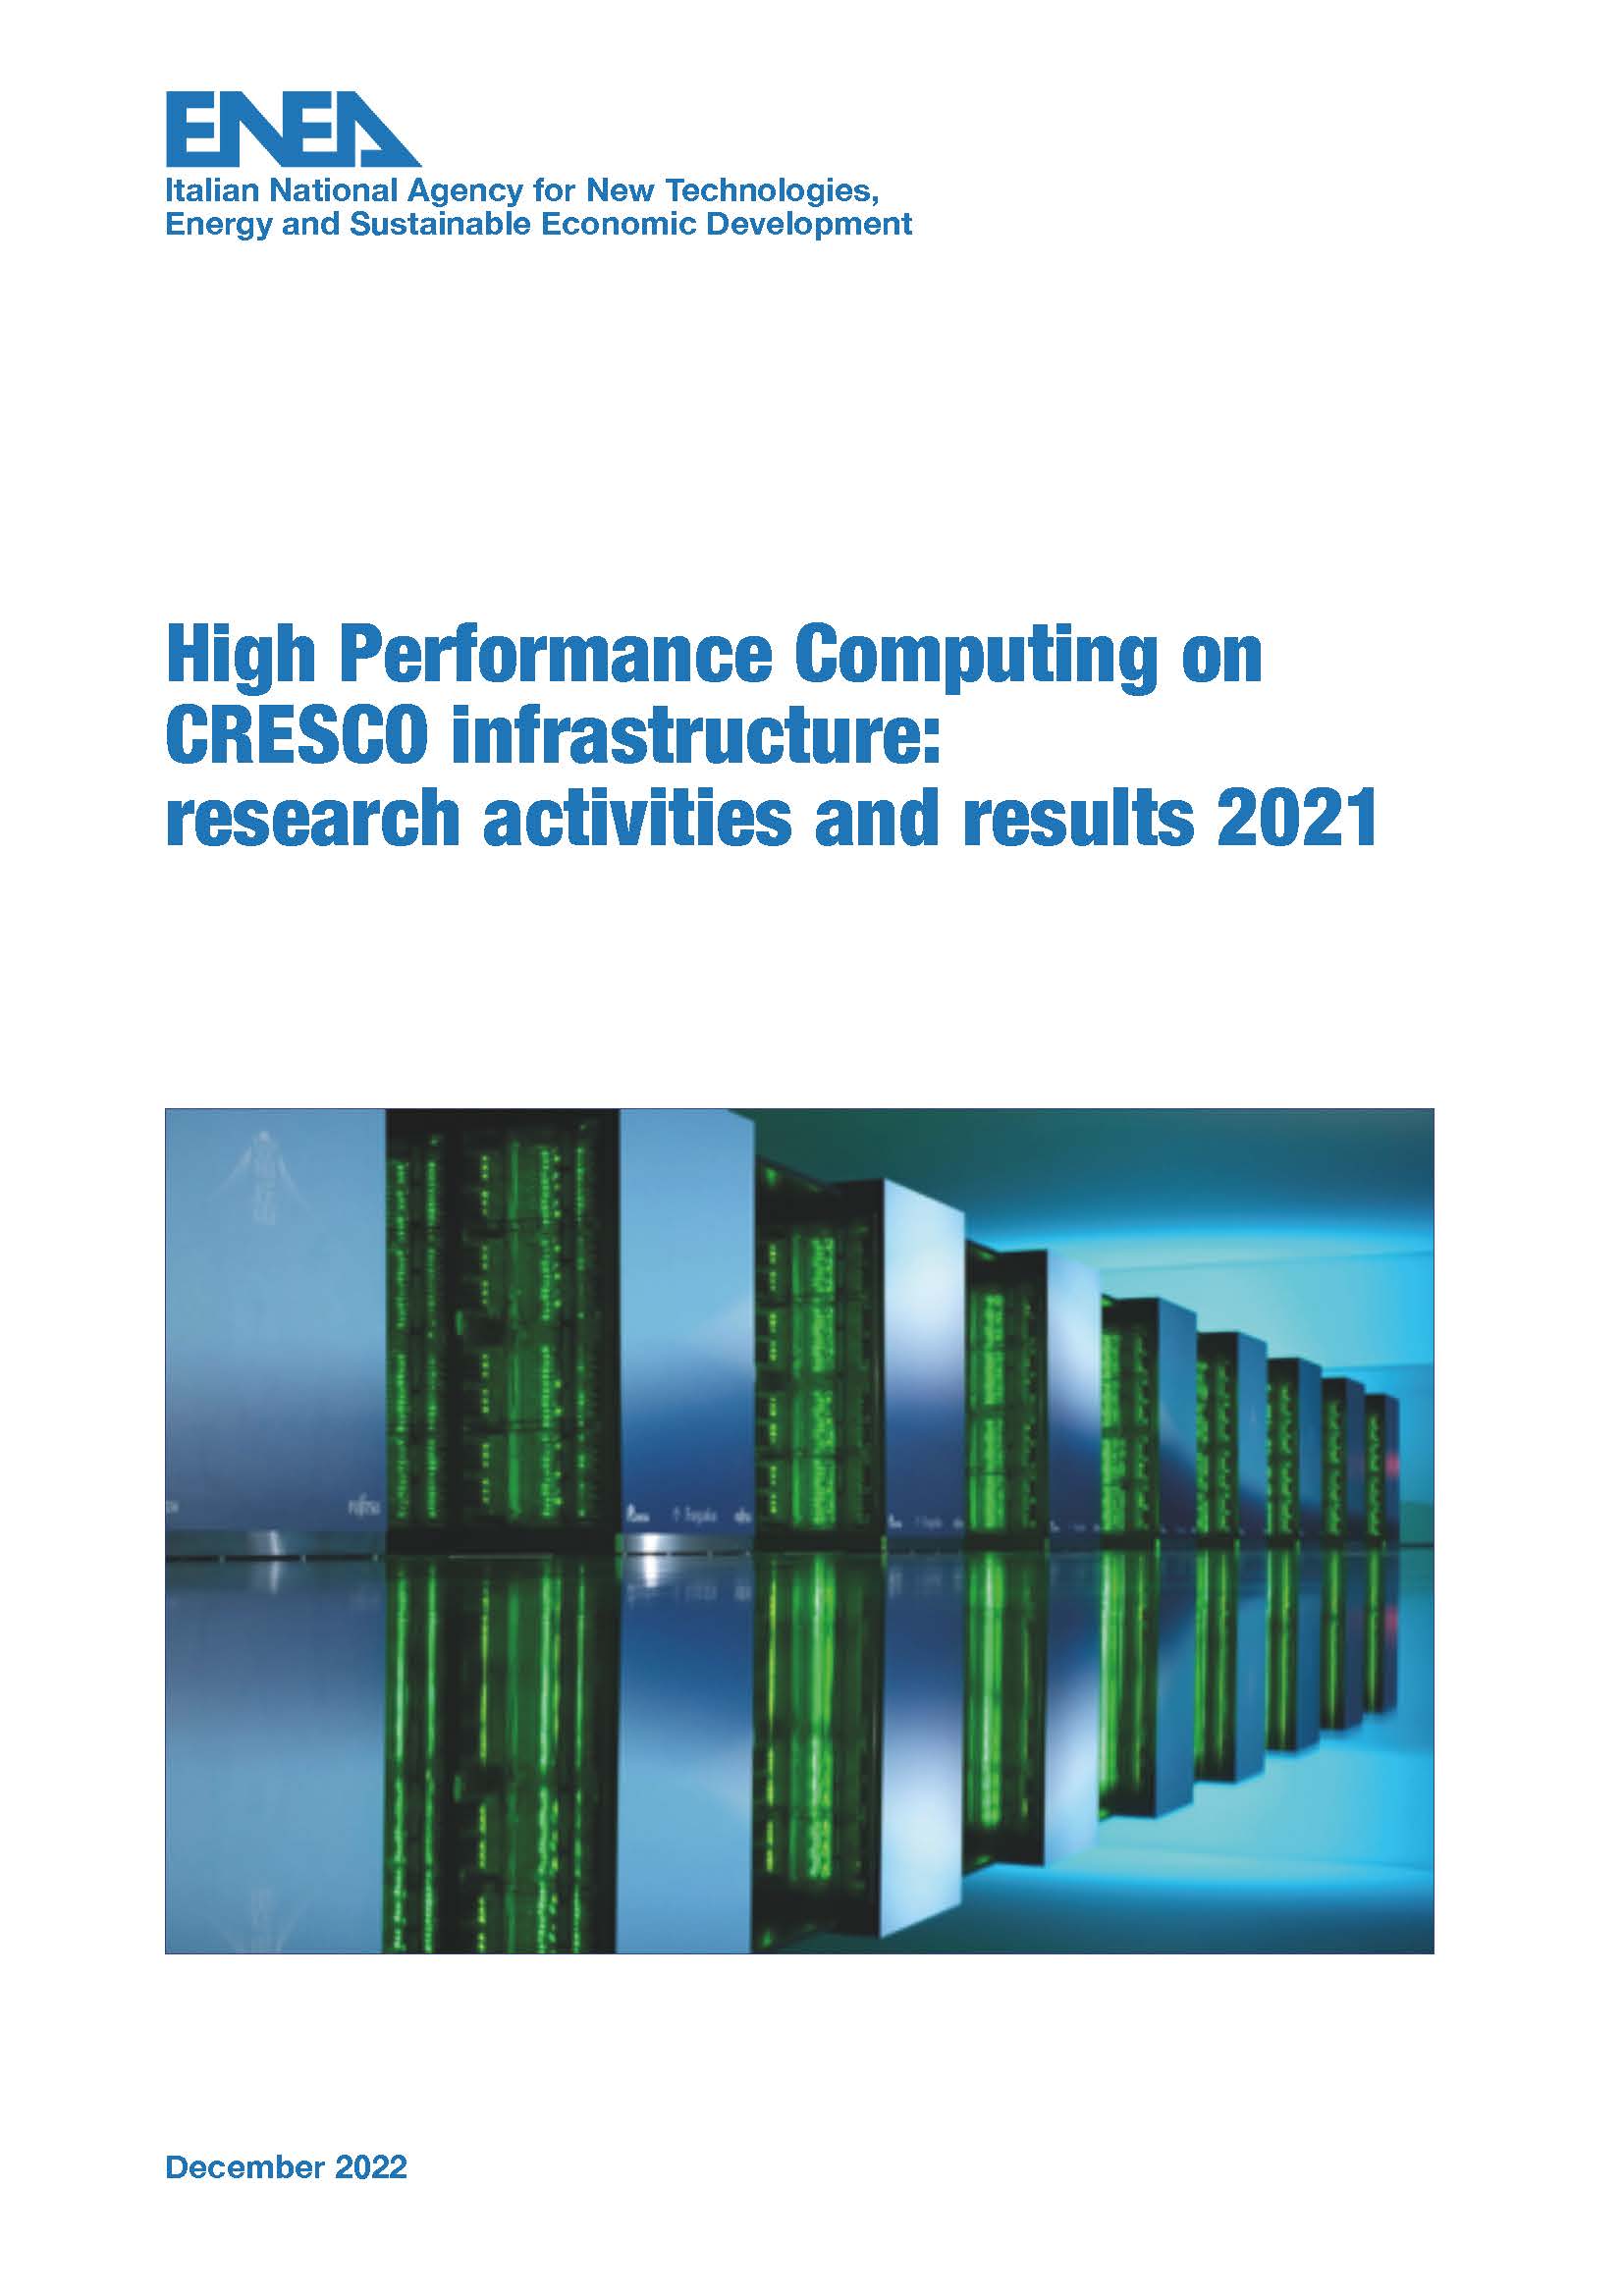 Cresco Report. High Performance Computing on CRESCO Infrastructure: research activity and results 2021